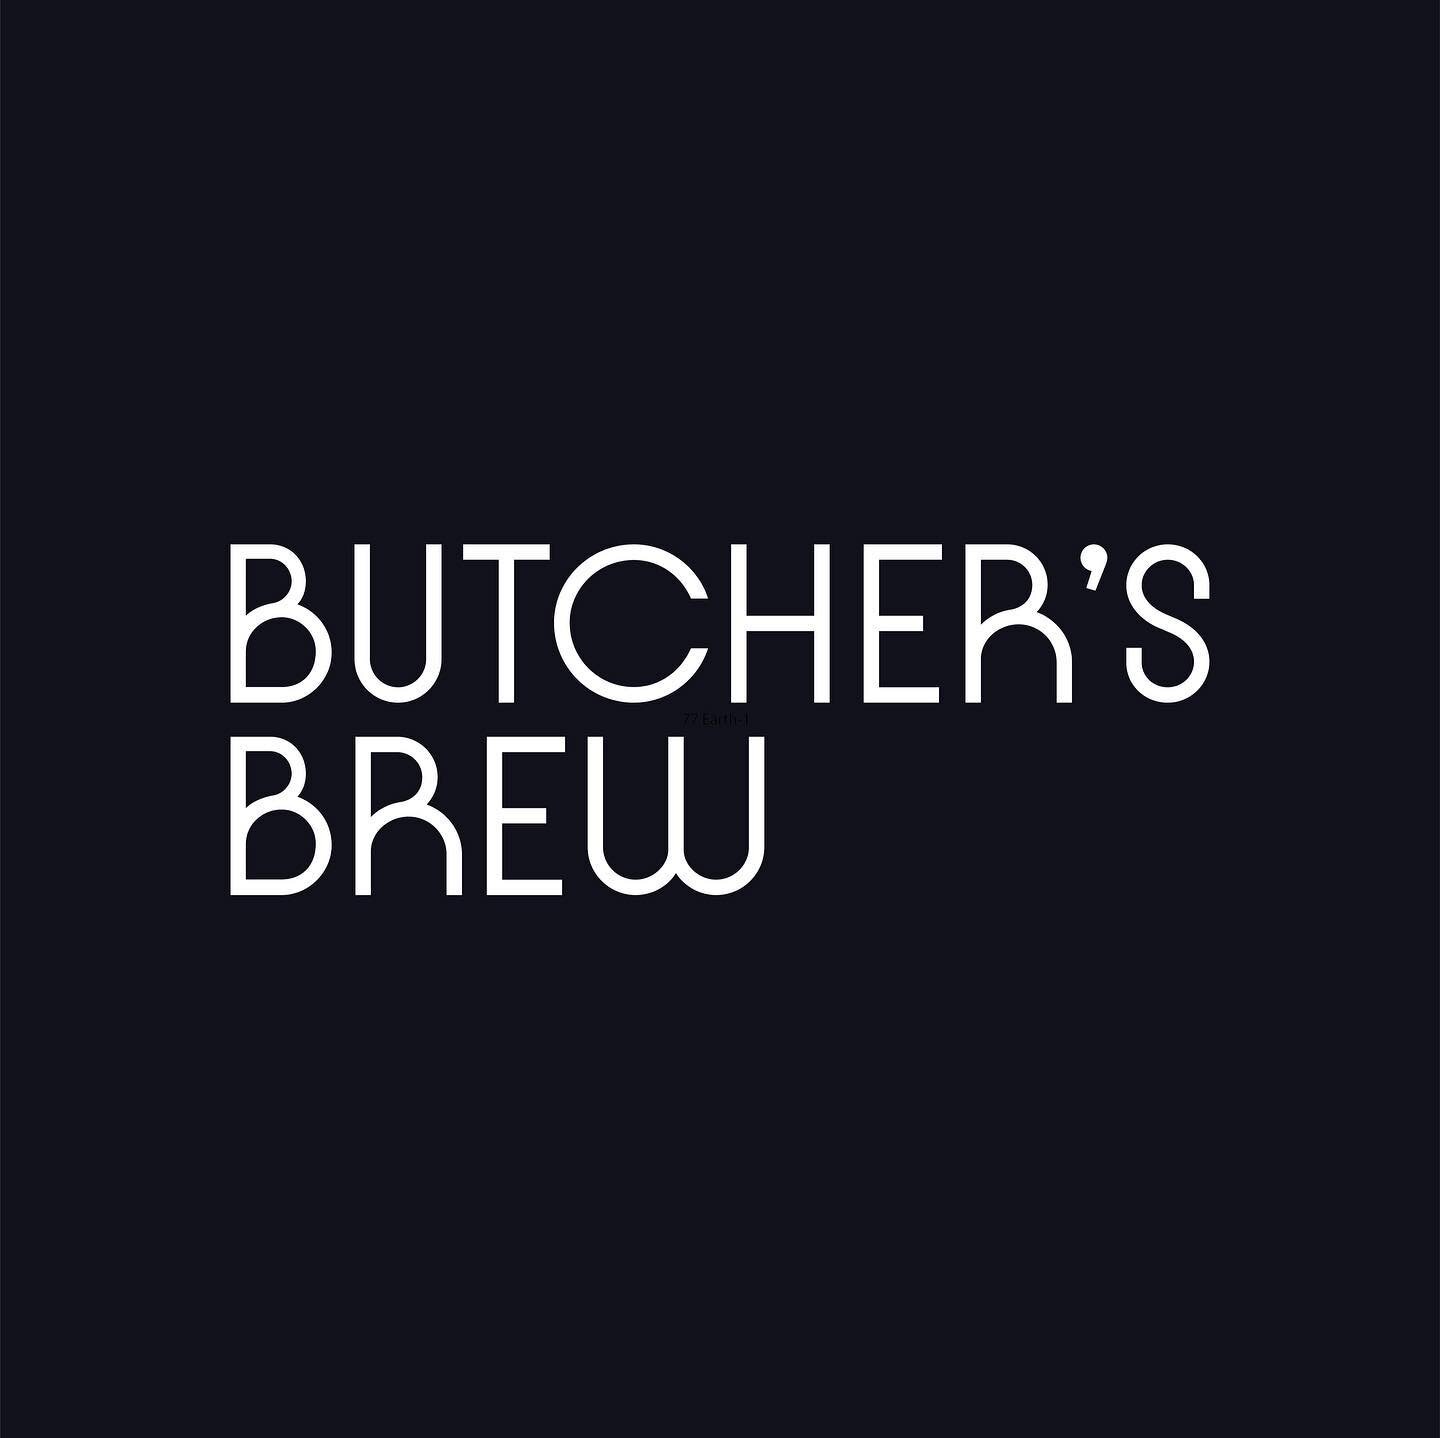 Compostable capsules of bone broth made from grass-fed cows. Available in the Netherlands. @butchersbrewamsterdam